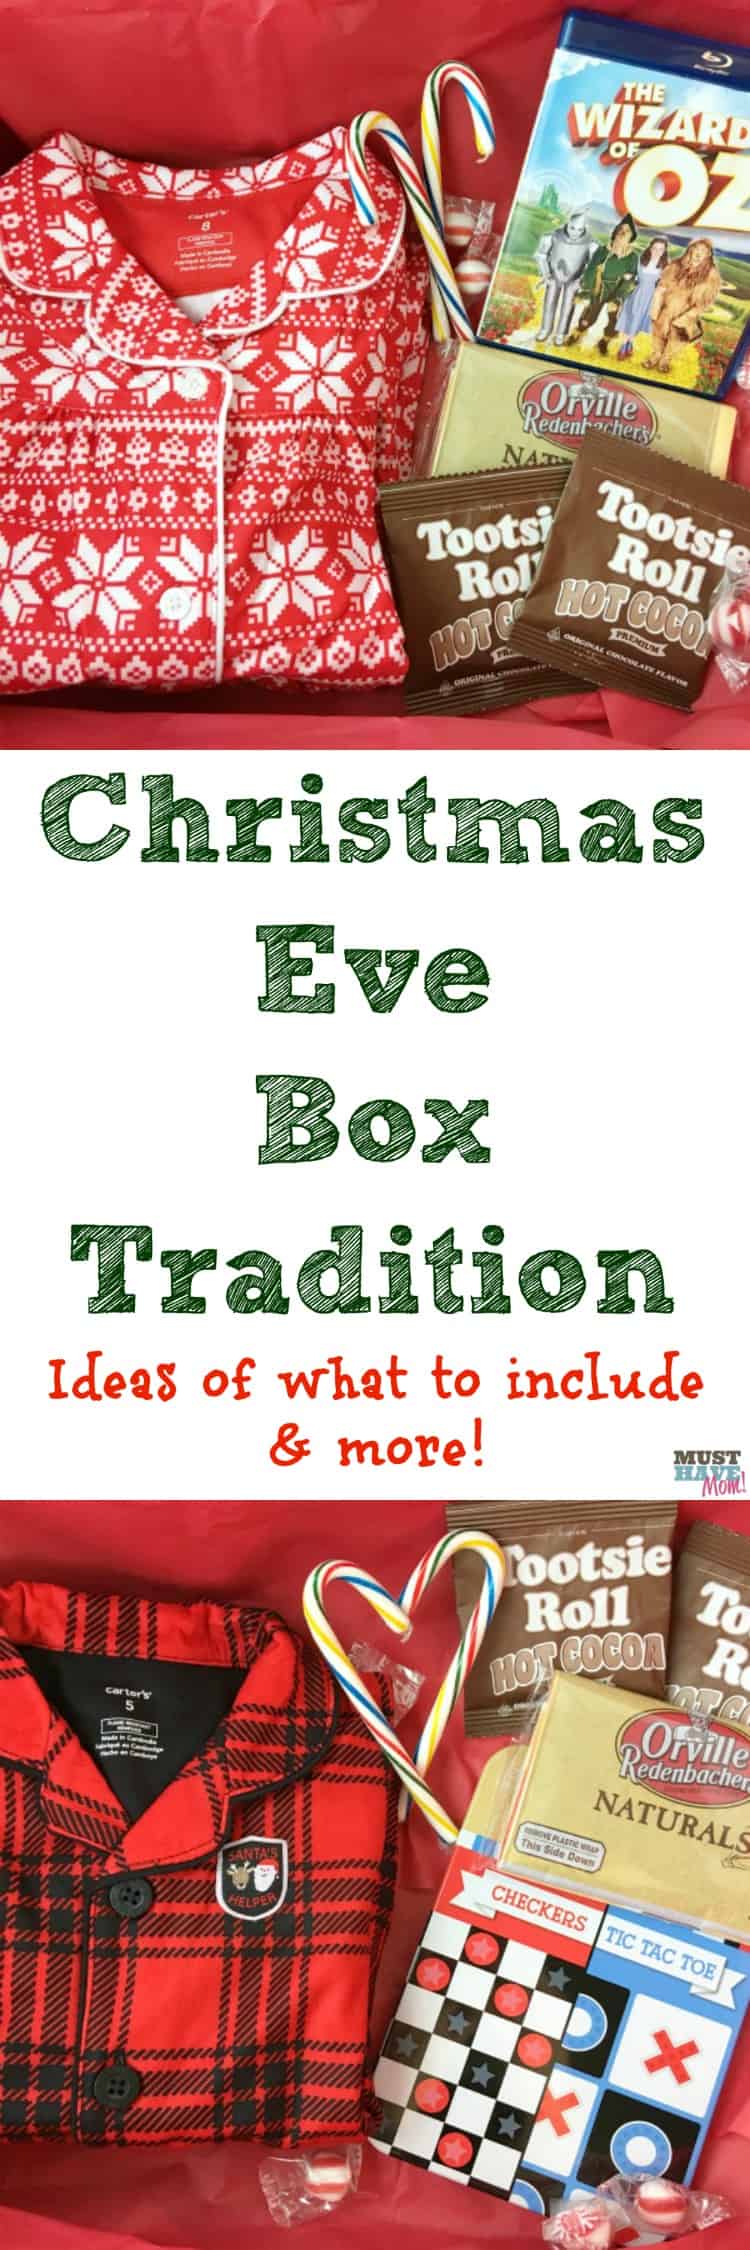 Awesome Christmas Traditions idea! Kids Christmas Eve boxes to open on the night before Christmas! List of what to include and ideas!